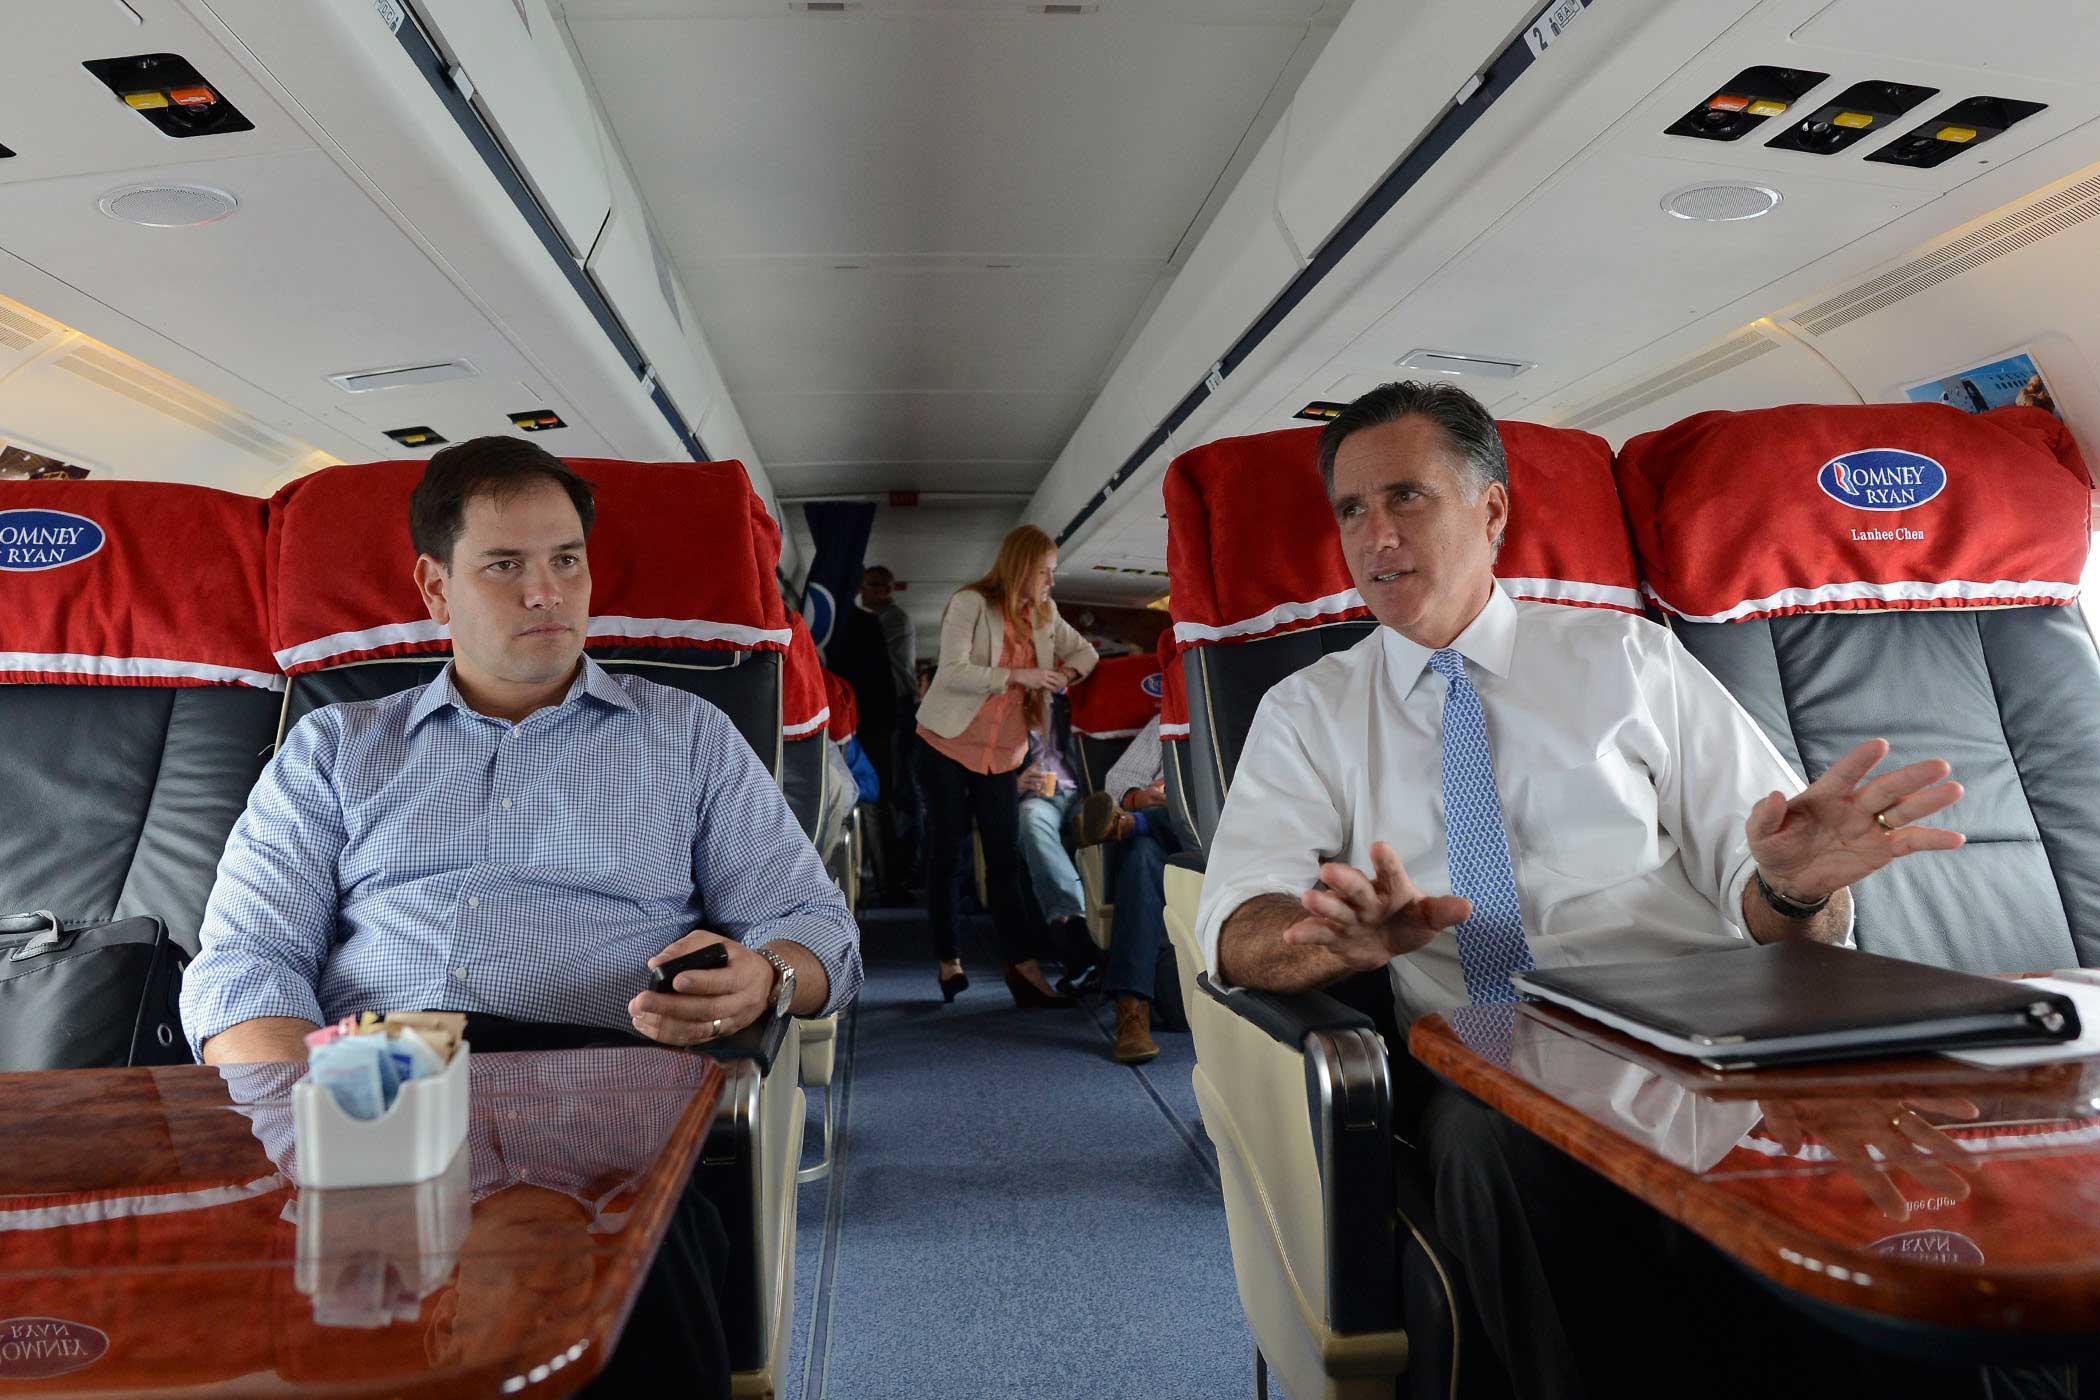 Former Republican Presidential candidate Mitt Romney speaks with Senator Marco Rubio while flying from Pensacola to Orlando, Fla., on Oct. 27, 2012.